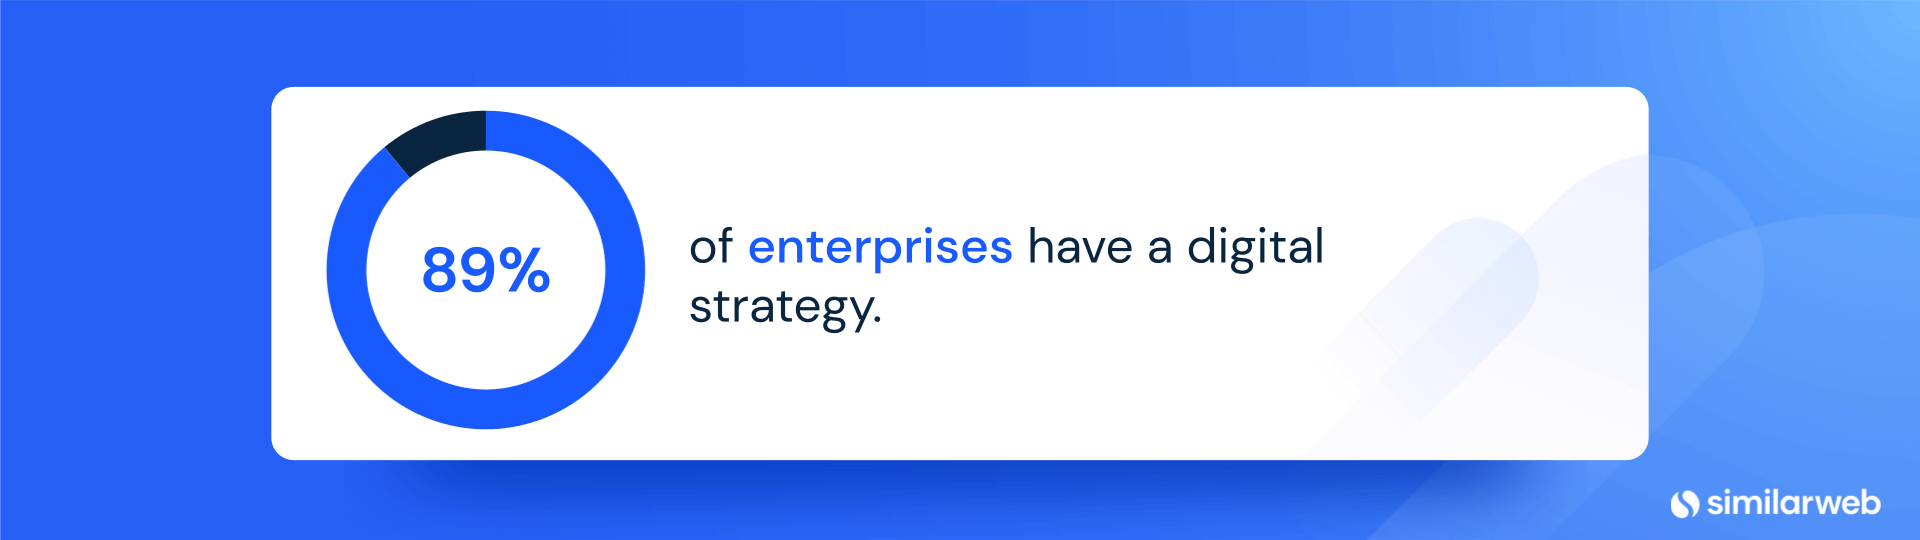 89% of enterprises to implement or plan to implement a digital strategy.